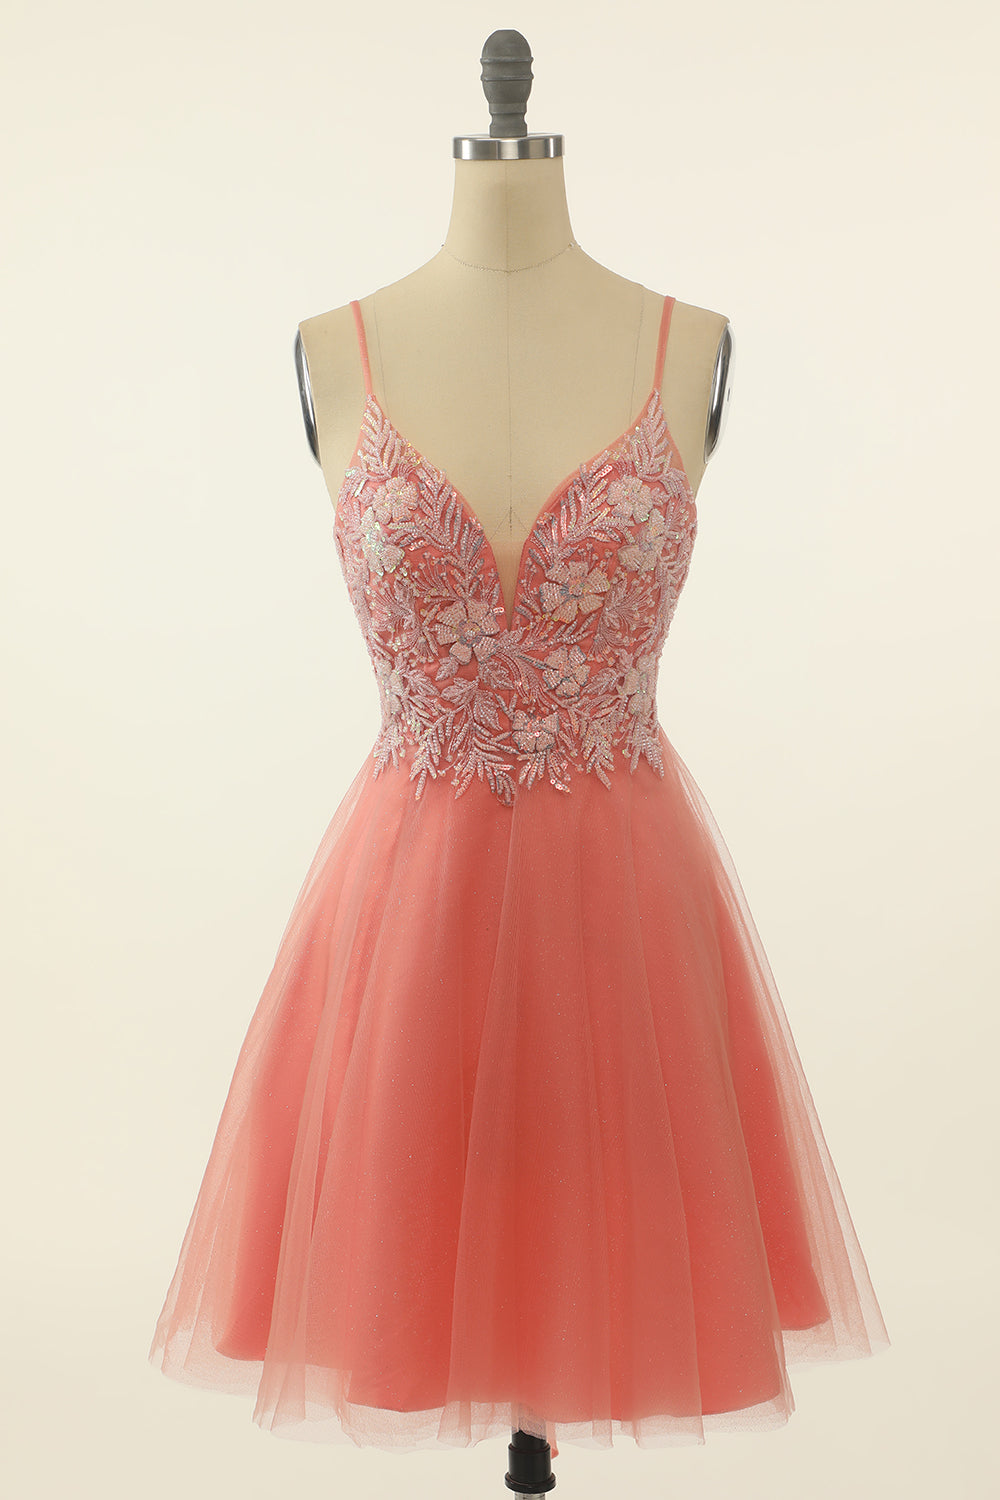 Blush Appliques Tulle Cute Corset Homecoming Dress outfit, Prom Dresses Ball Gown Elegant